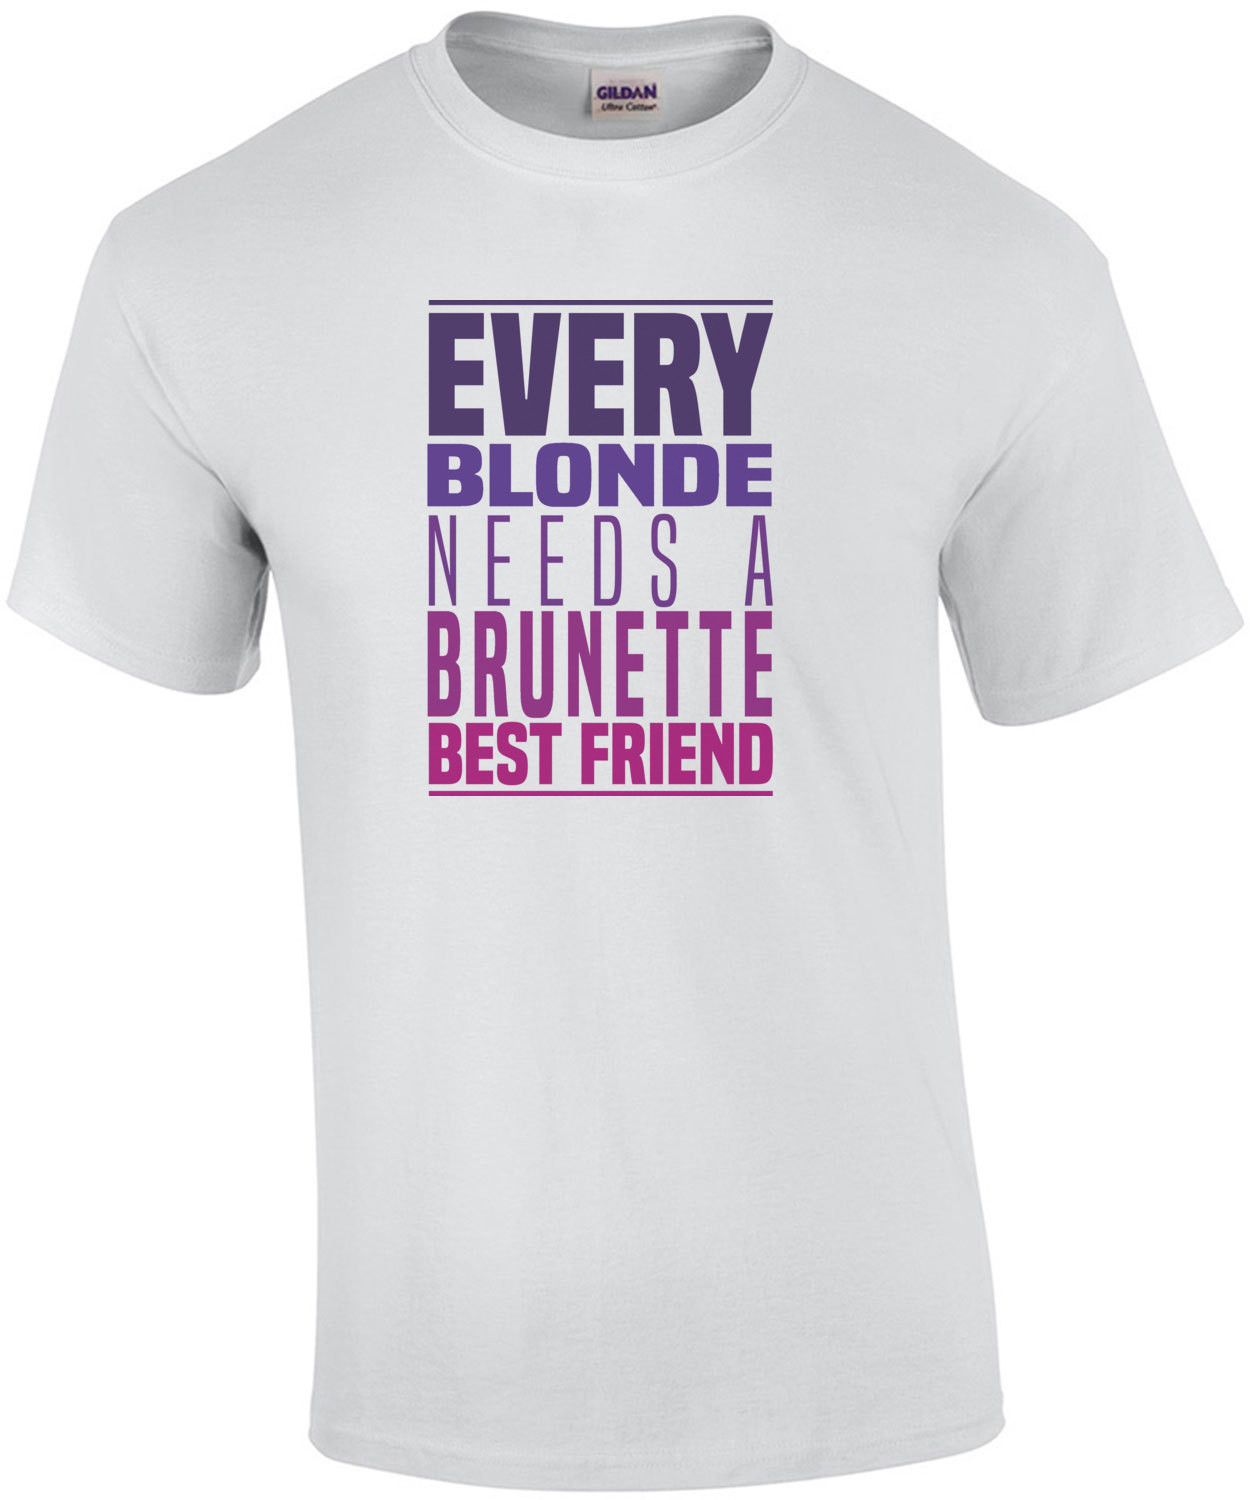 Every blonde needs a brunette best friend - funny ladies shirt